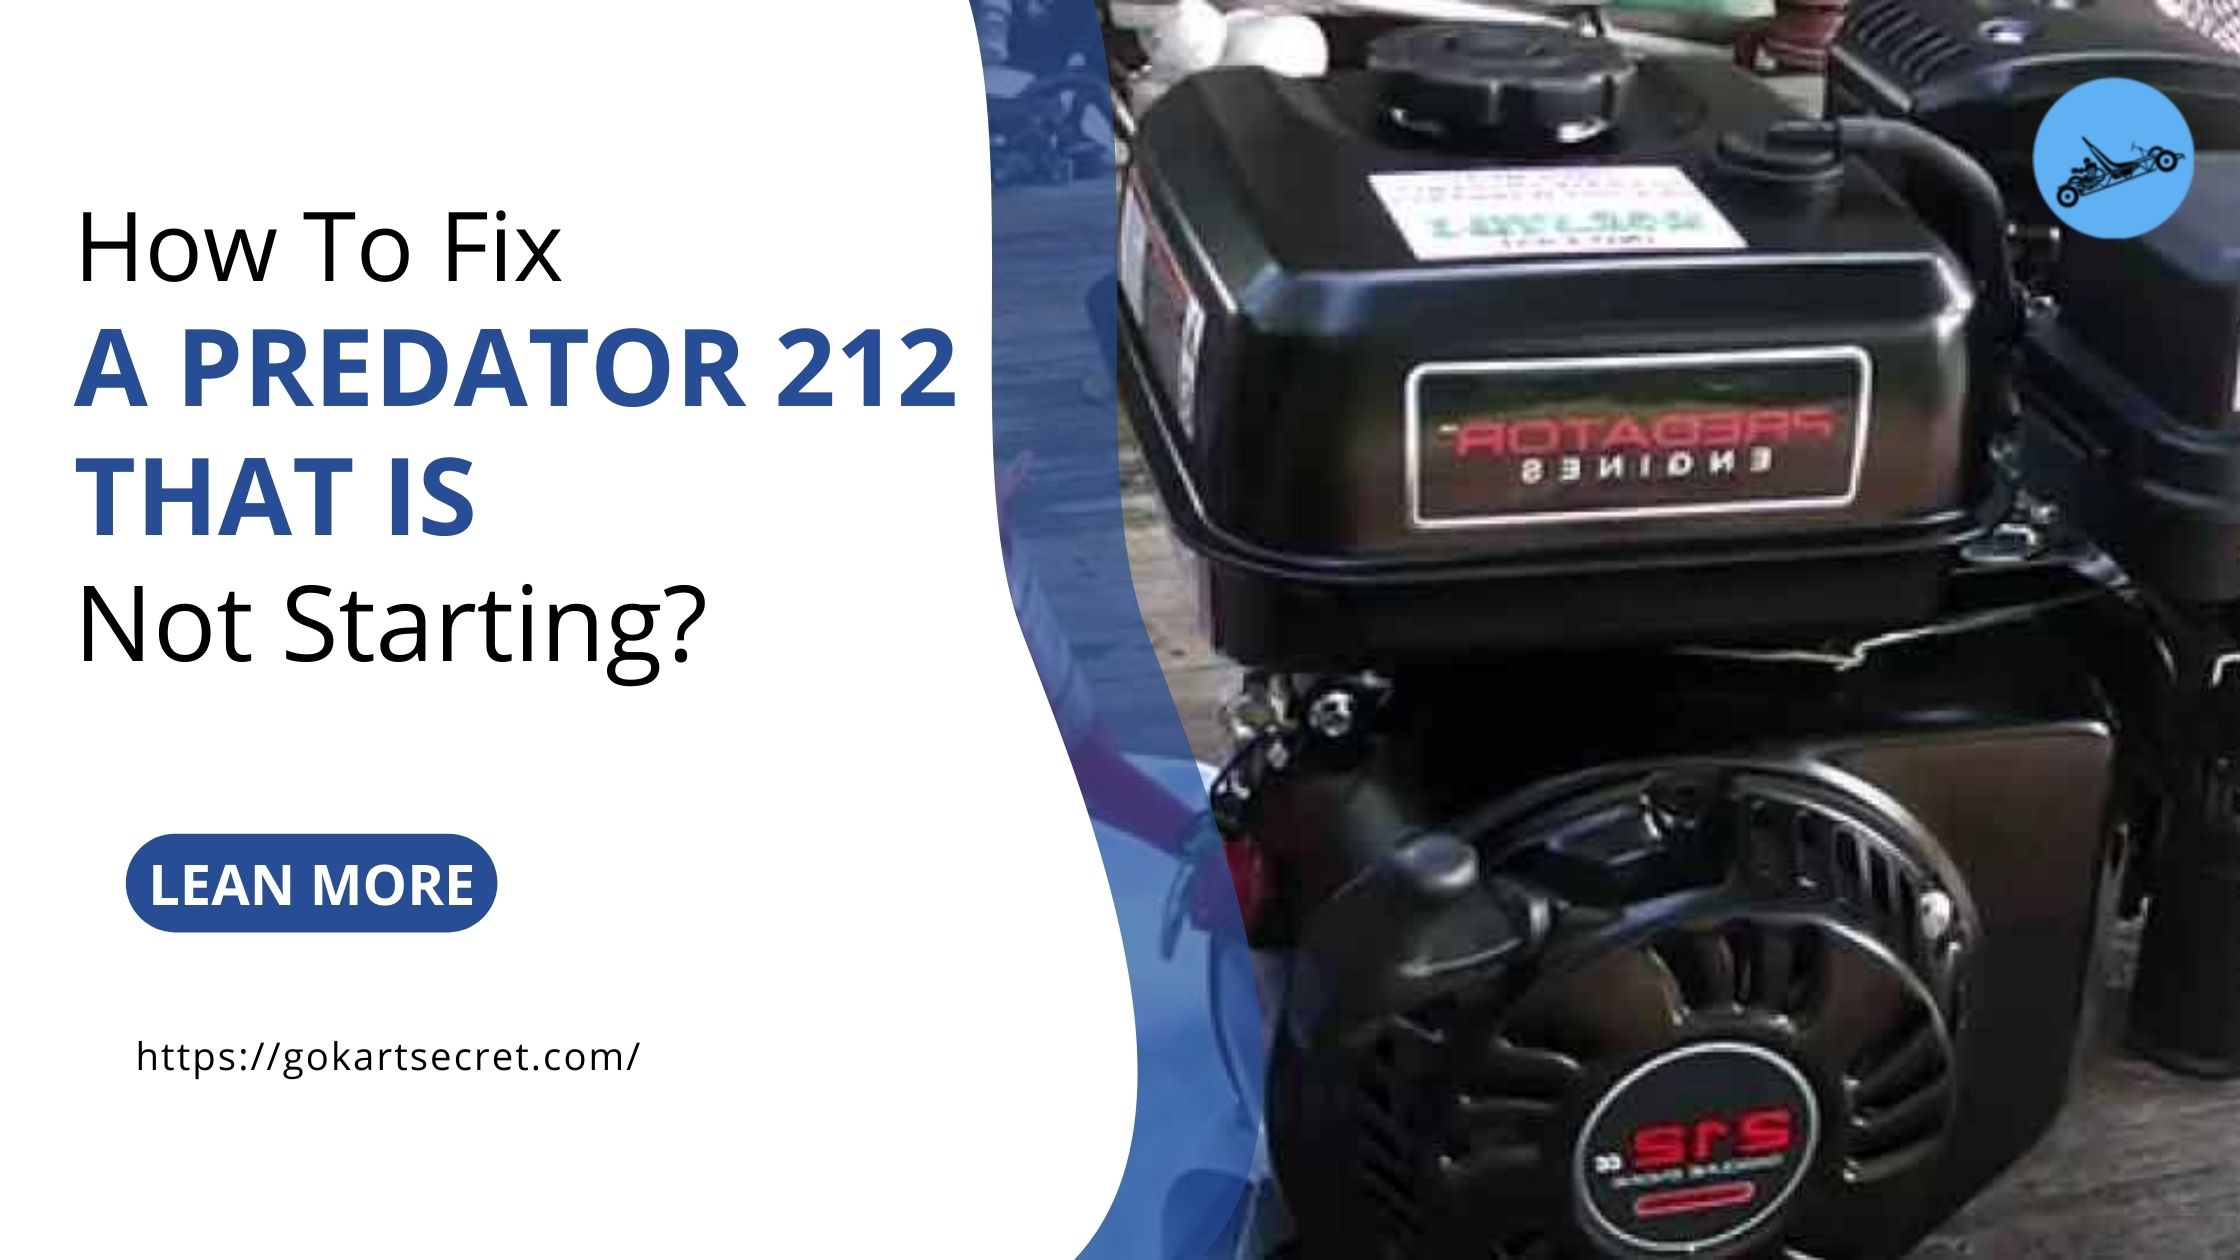 How To Fix A Predator 212 That Is Not Starting?